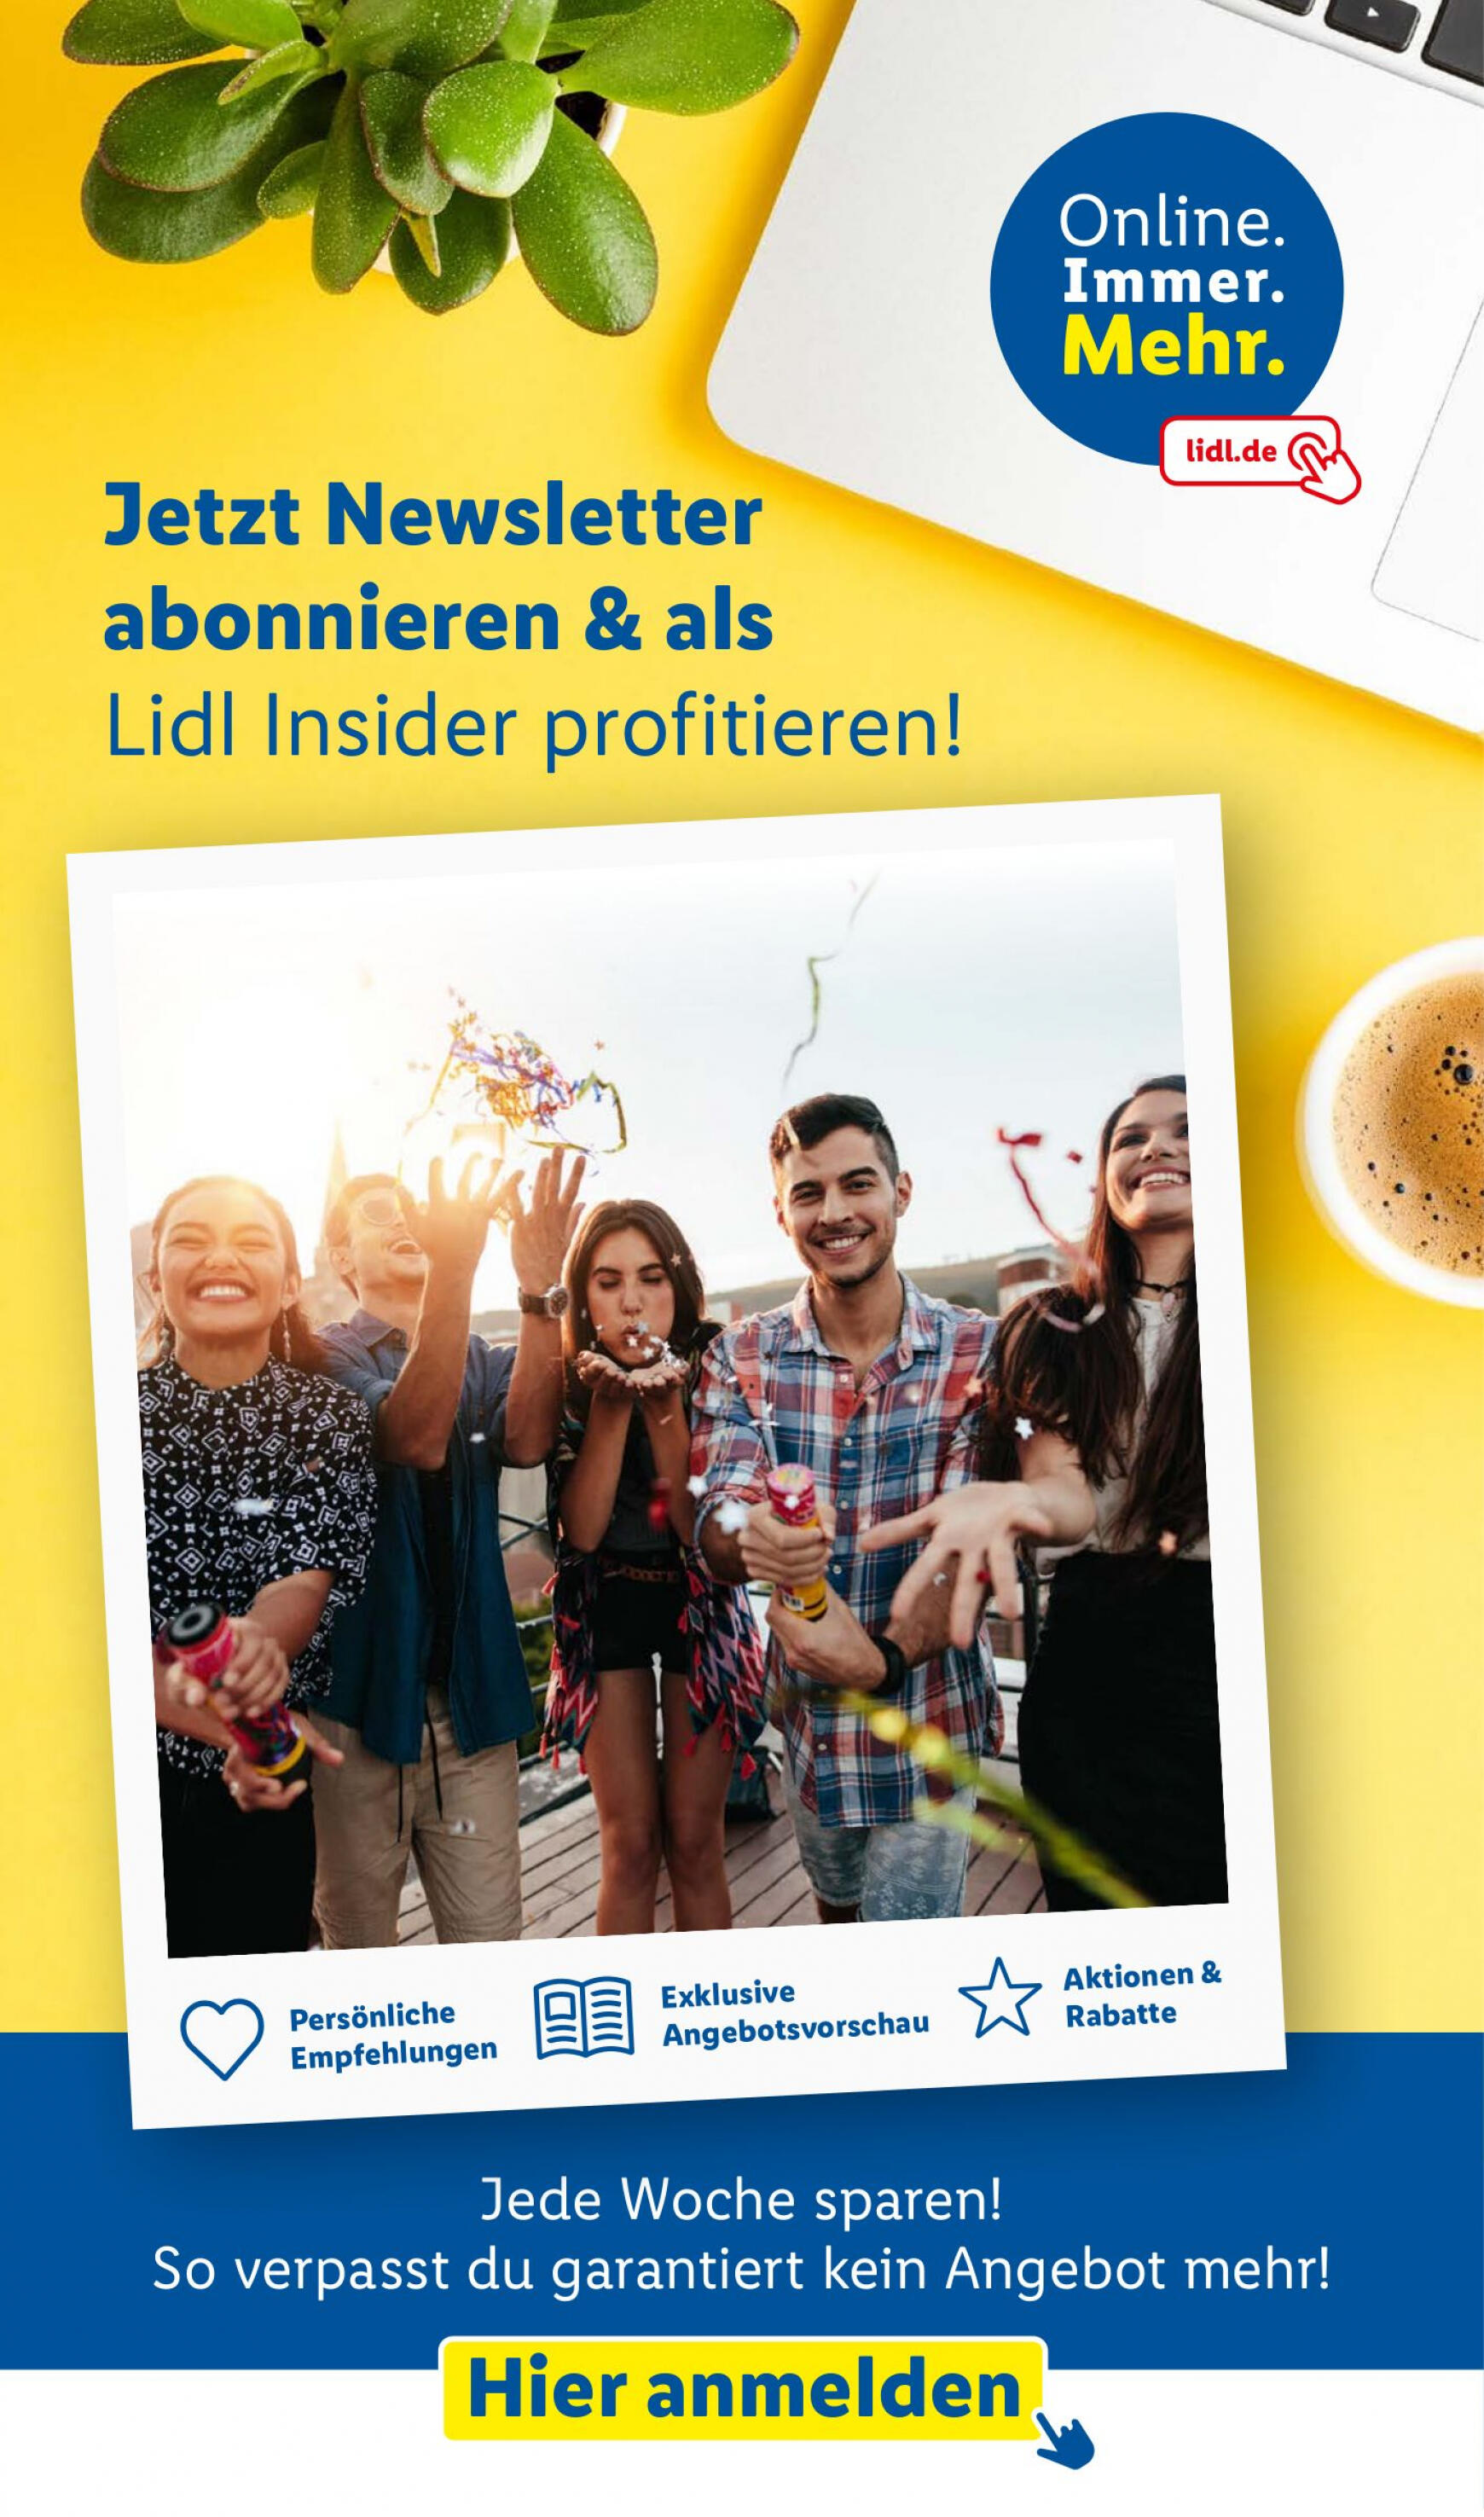 lidl - Flyer Lidl aktuell 22.04. - 27.04. - page: 63